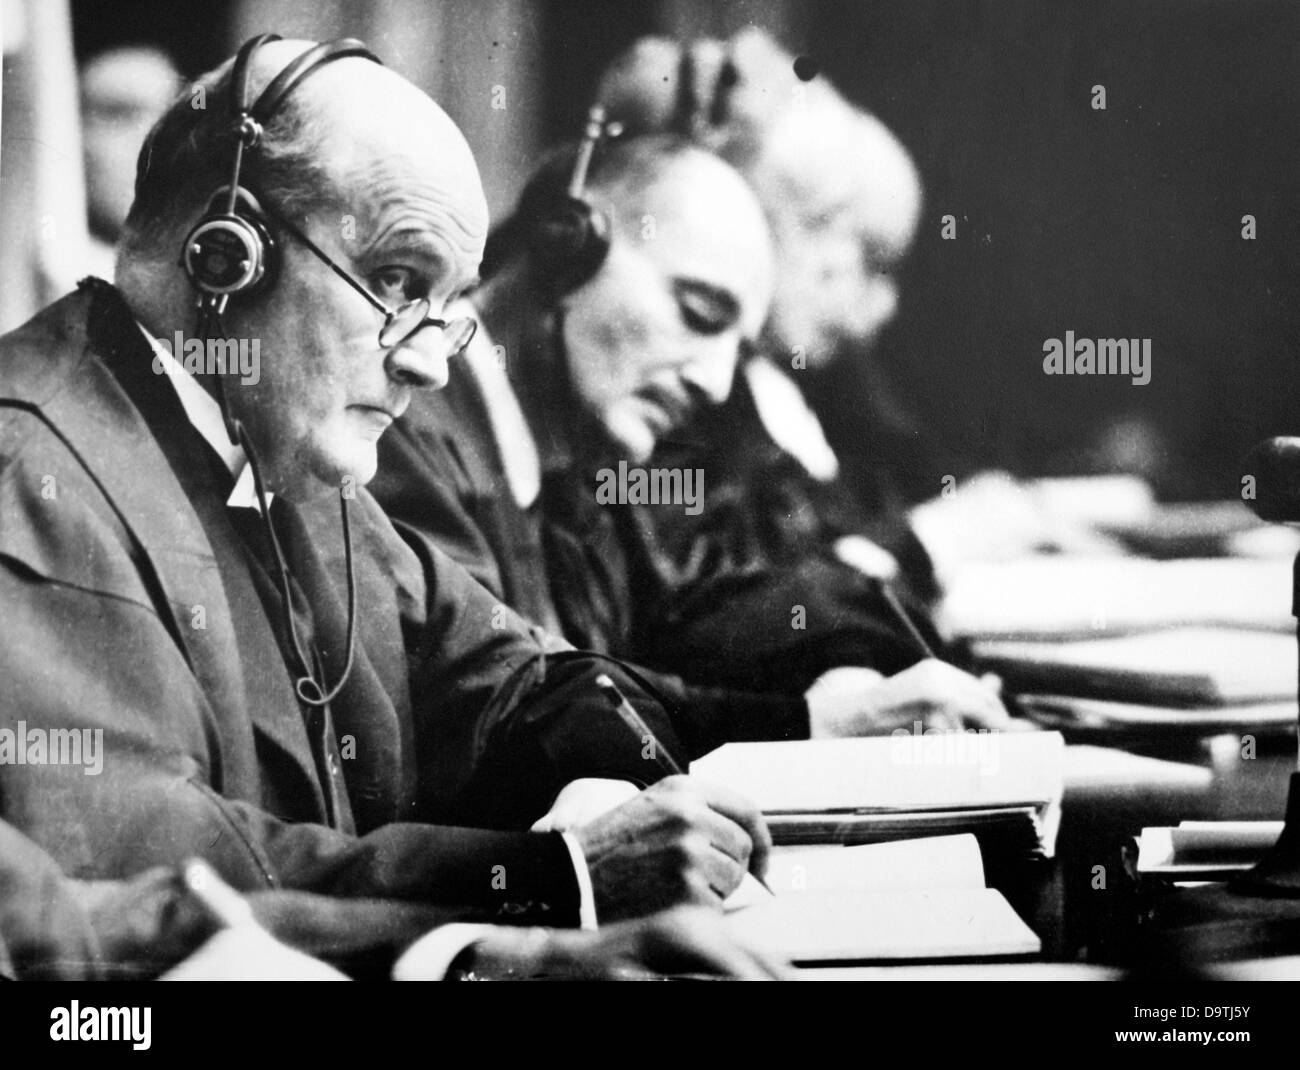 Lord of Appeal in Ordinary Geoffrey Lawrence (Great Britain), President of the International Miltiary Tribunal against the major war criminals of World War II, is pictured at the Nuremberg Trials in Nuremberg, Germany, in 1946. Photo: Yevgeny Khaldei Stock Photo